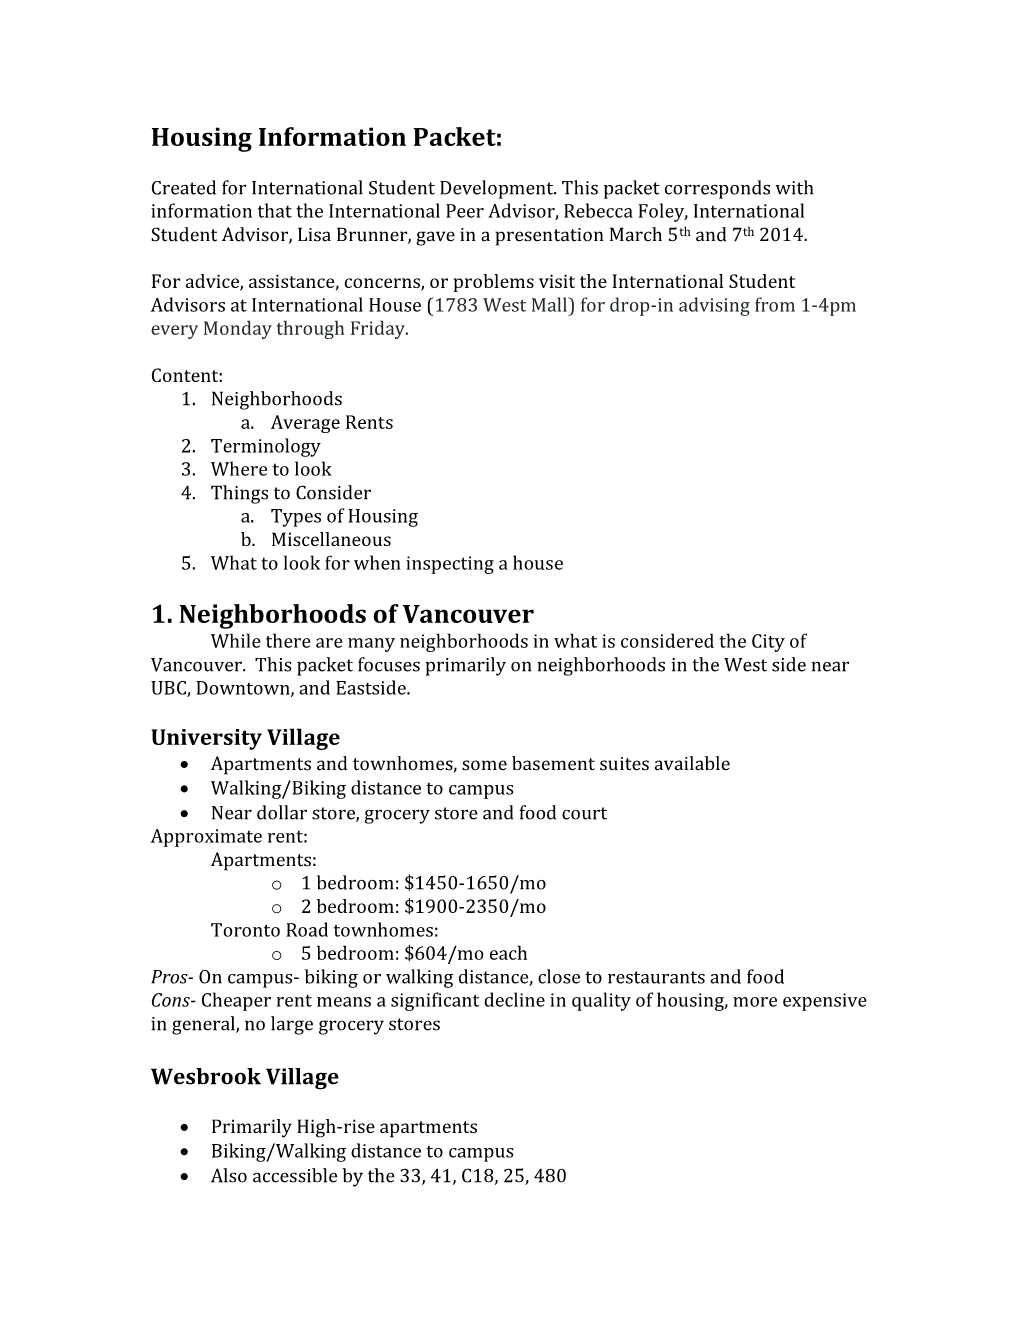 Housing Information Packet: 1. Neighborhoods of Vancouver